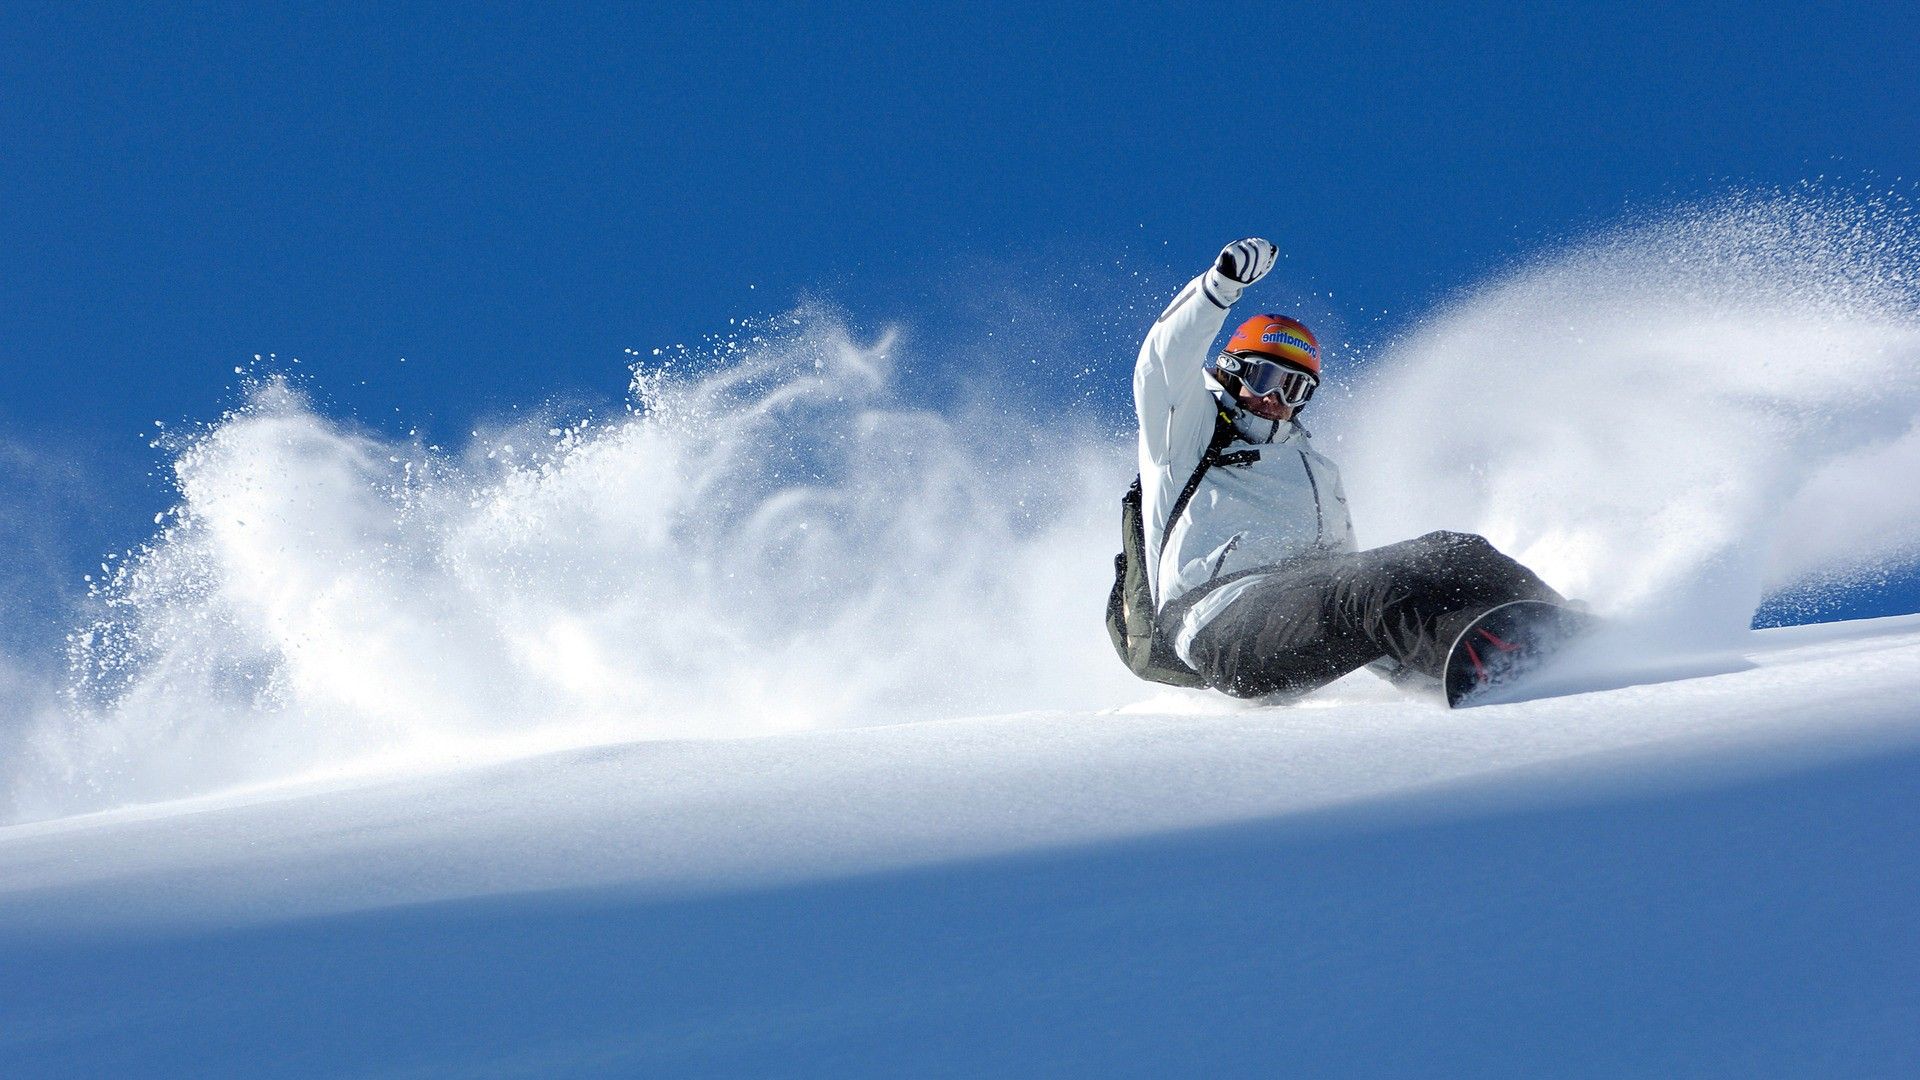 awesome natural snowboarding image